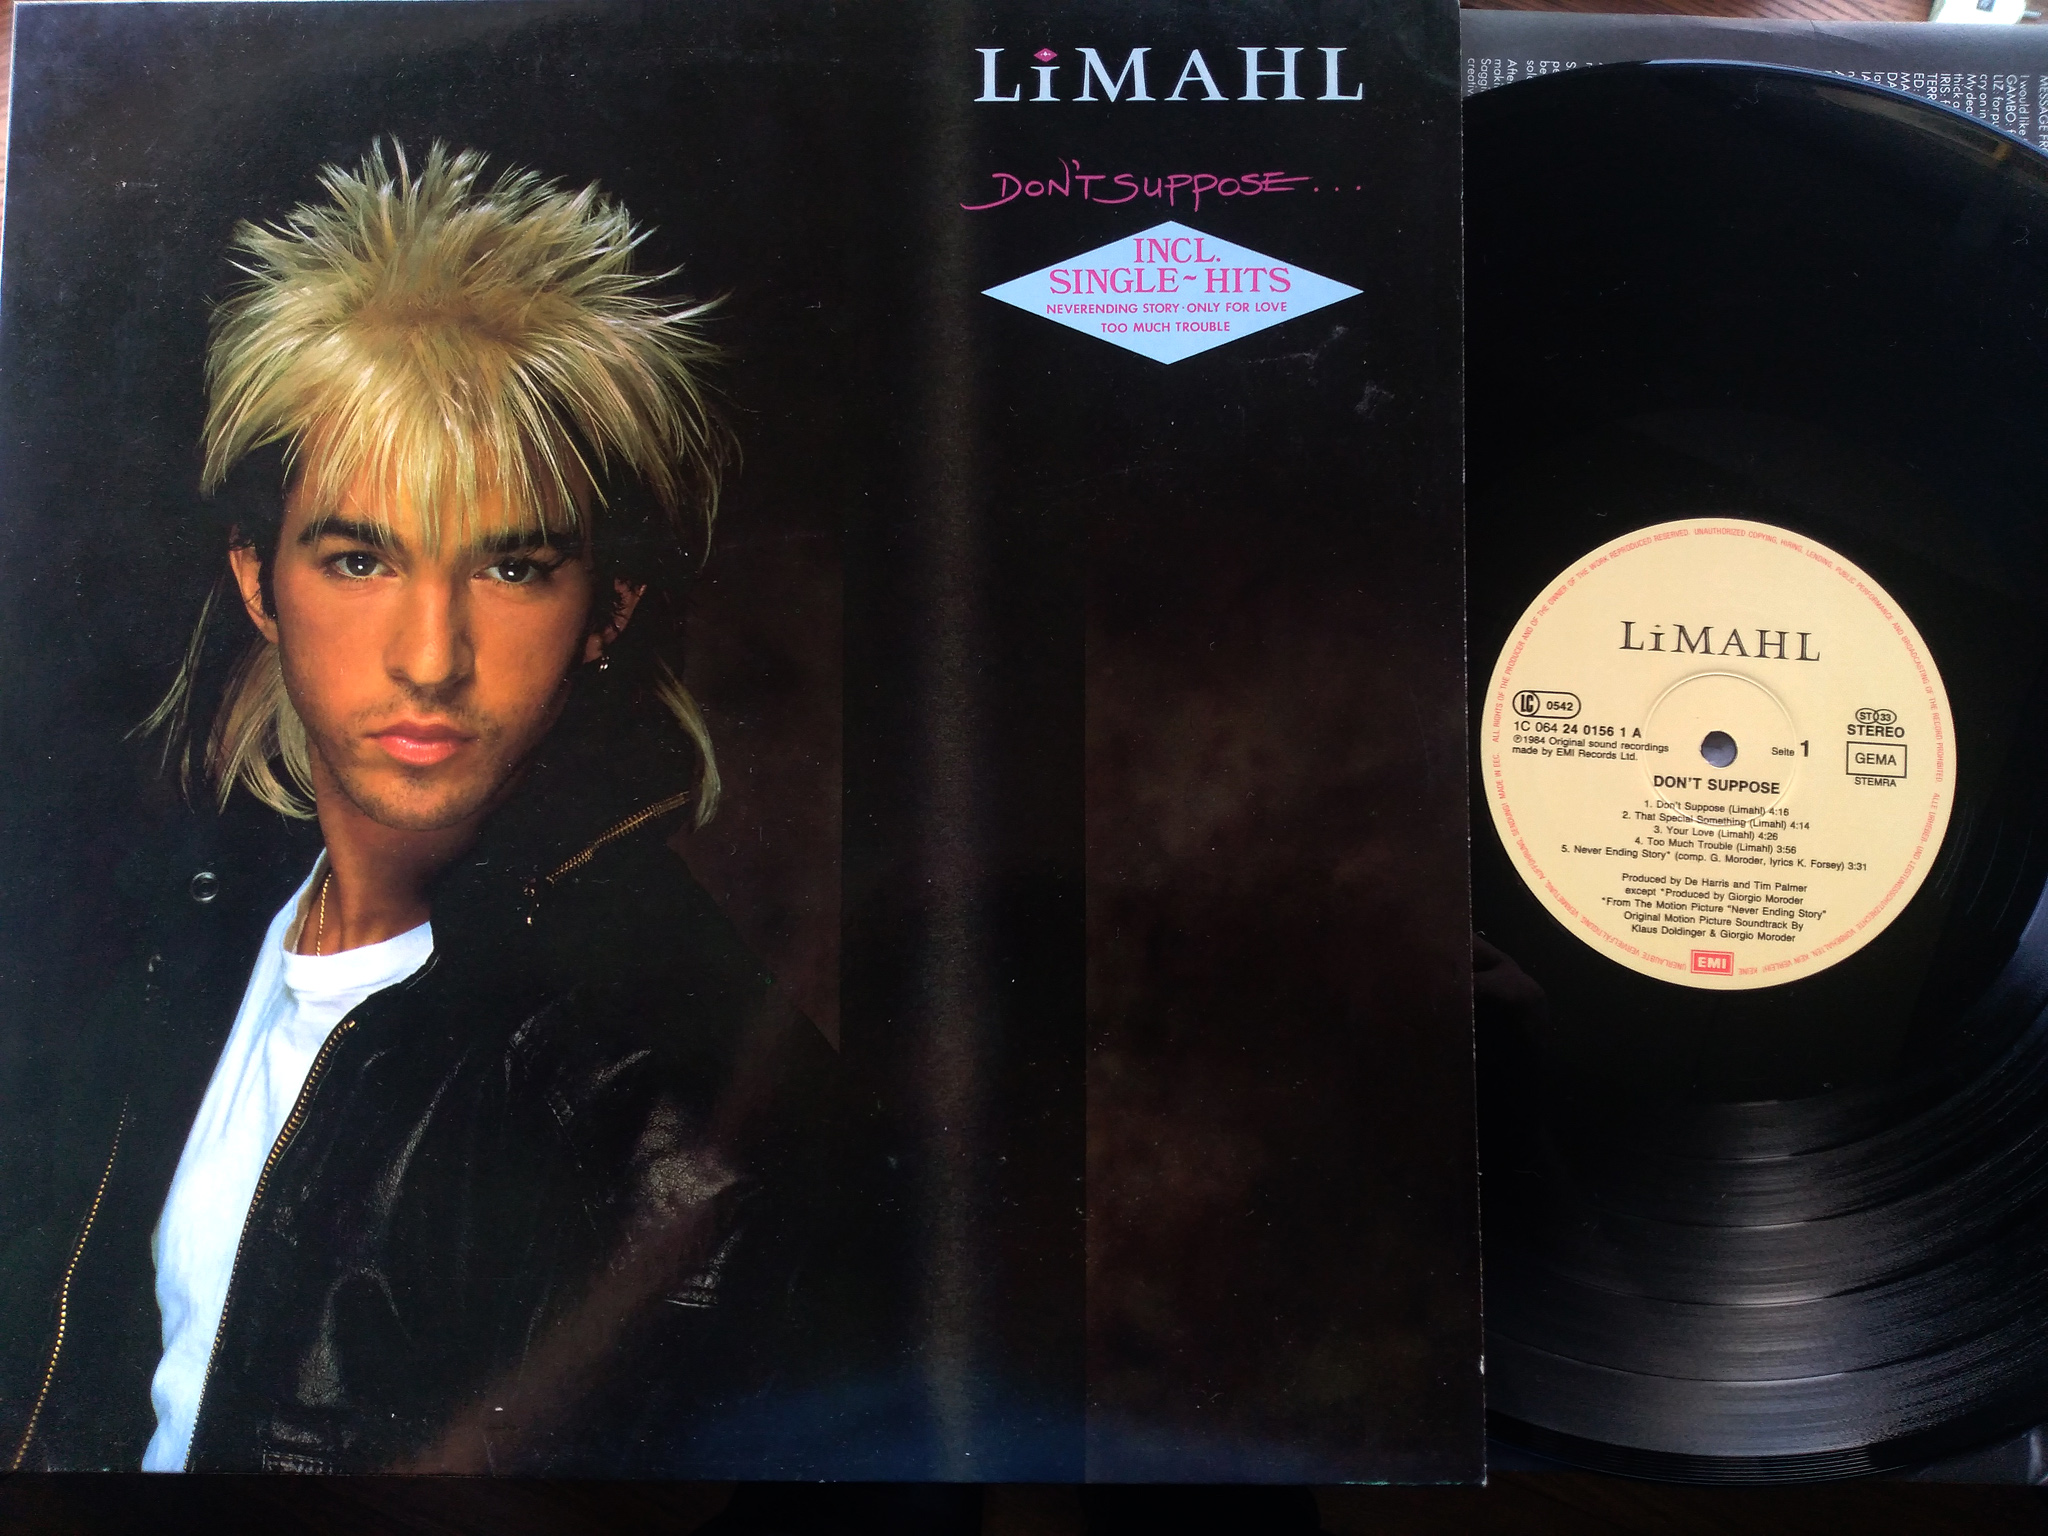 Limahl - Don't Suppose LP